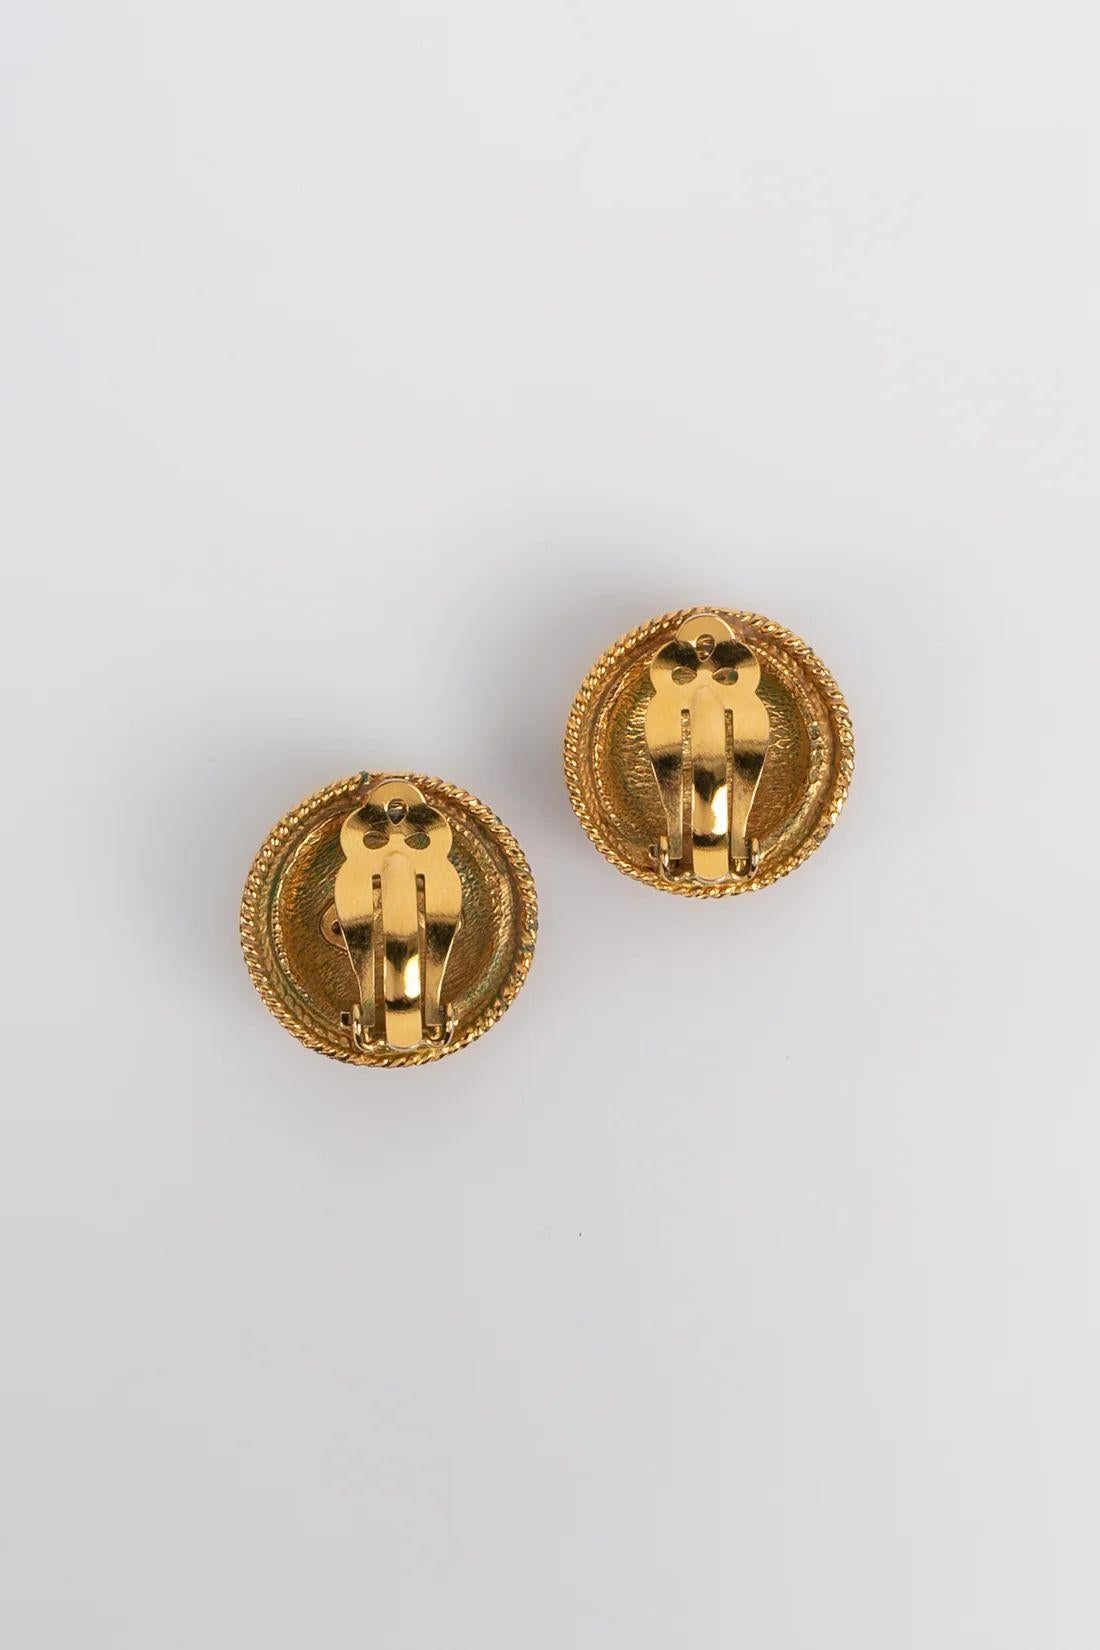 Chanel Earrings in Gilded Metal and Glass Paste 2